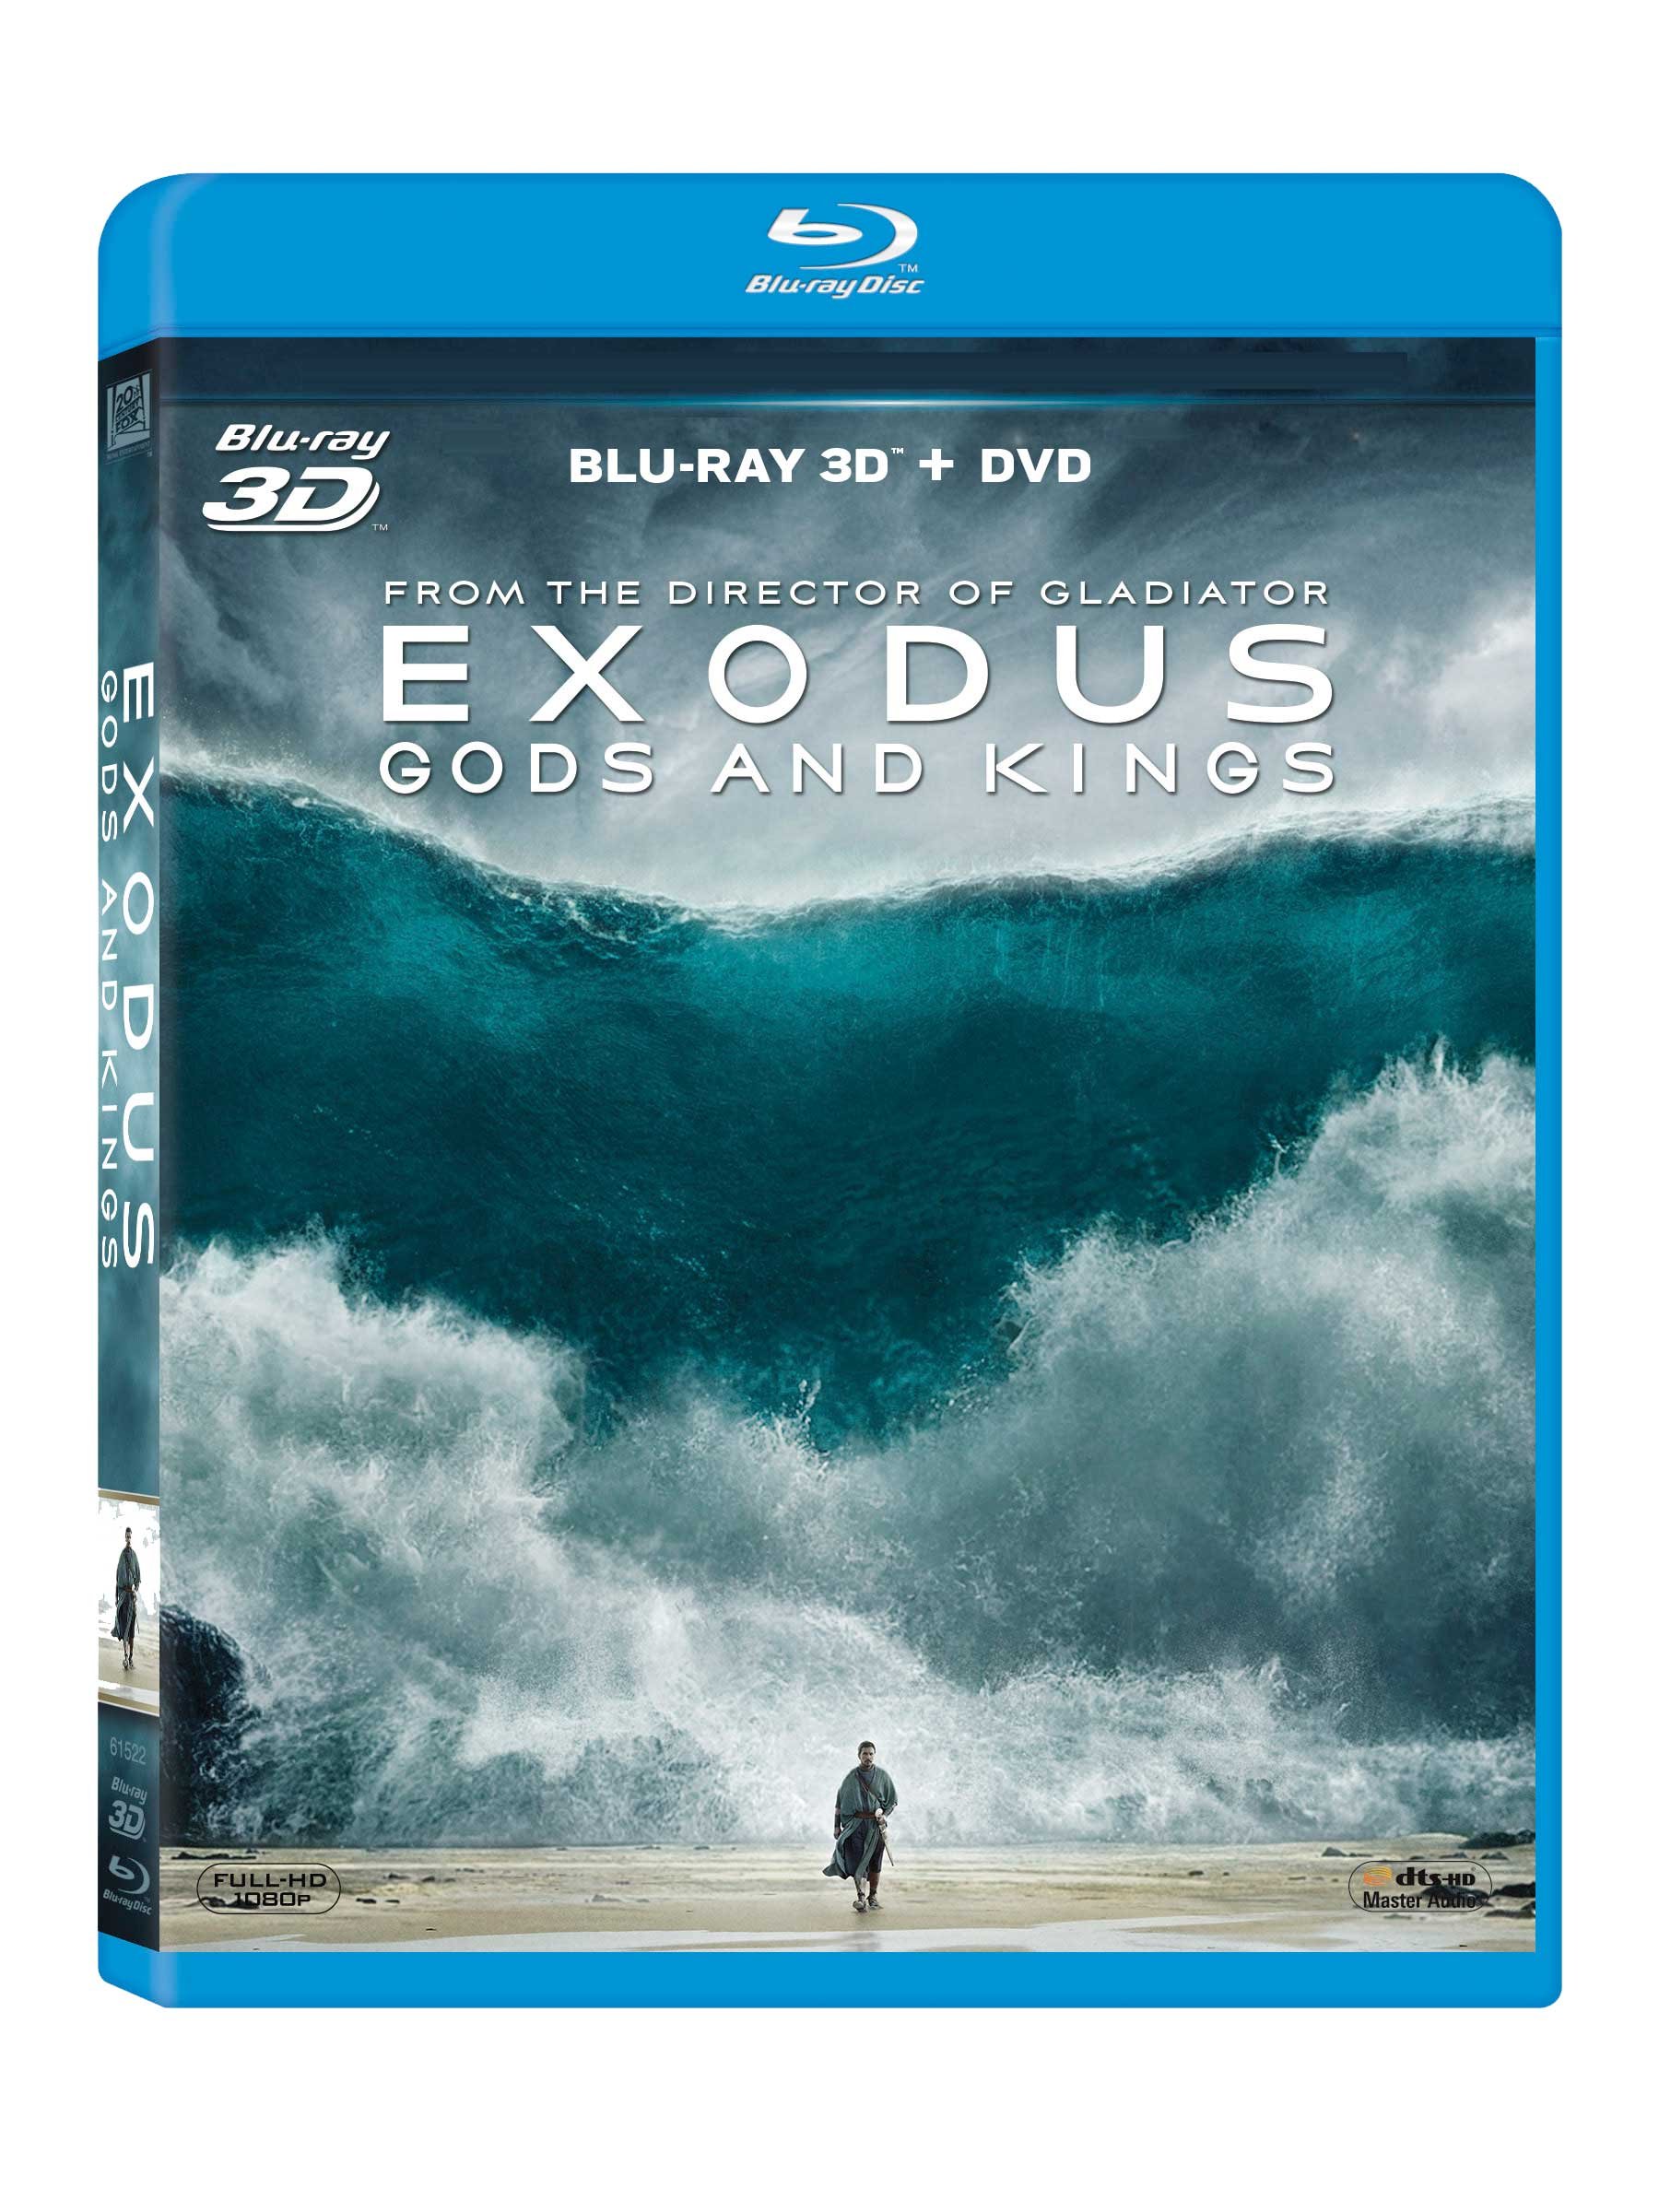 exodus-gods-and-kings-blu-ray-3d-dvd-2-disc-movie-purchase-or-w